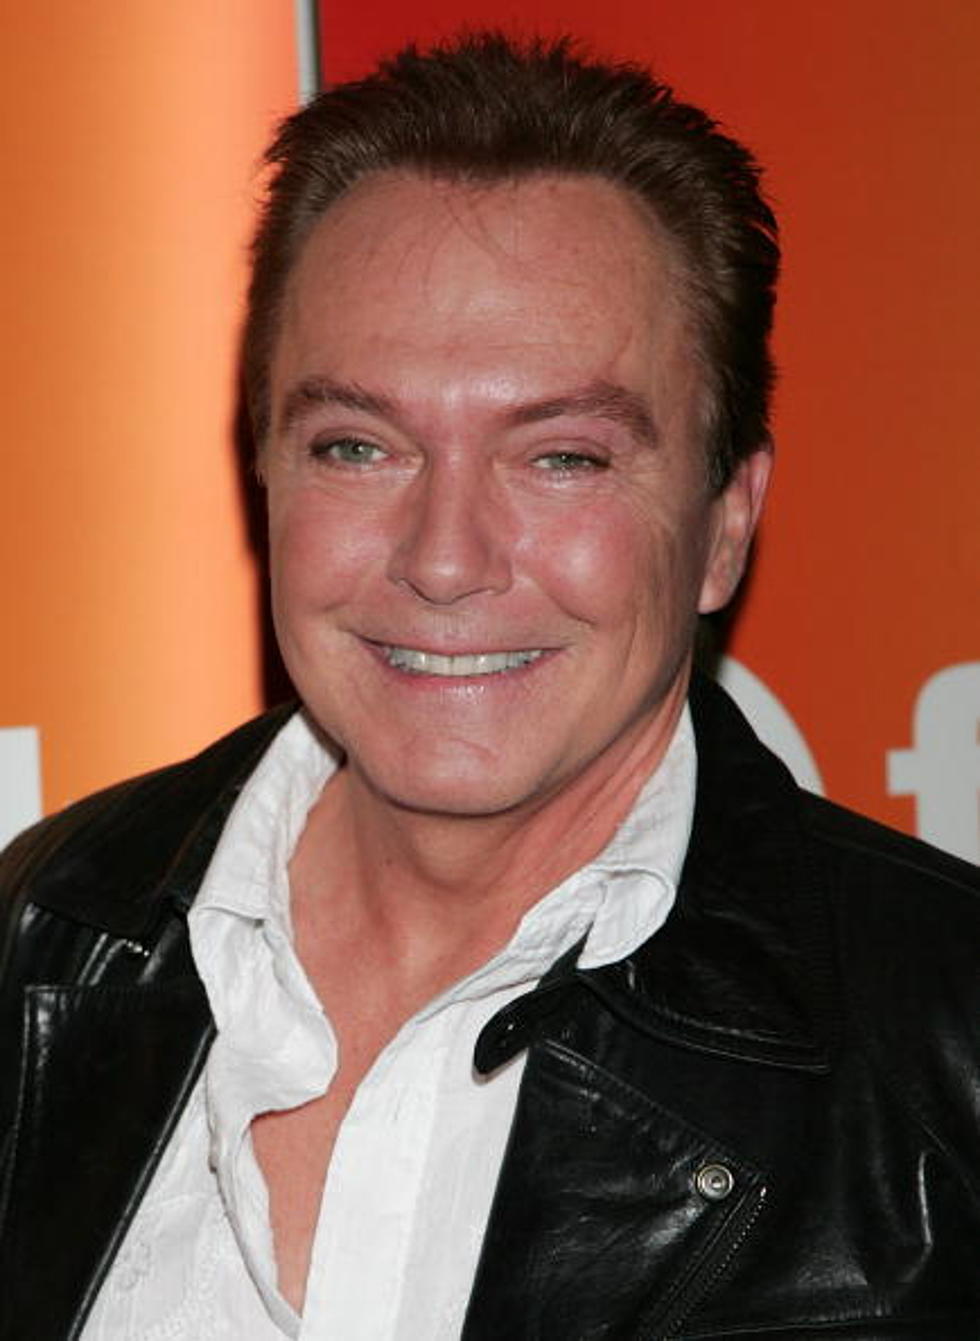 David Cassidy On The Air With Me Talking “The Apprentice”